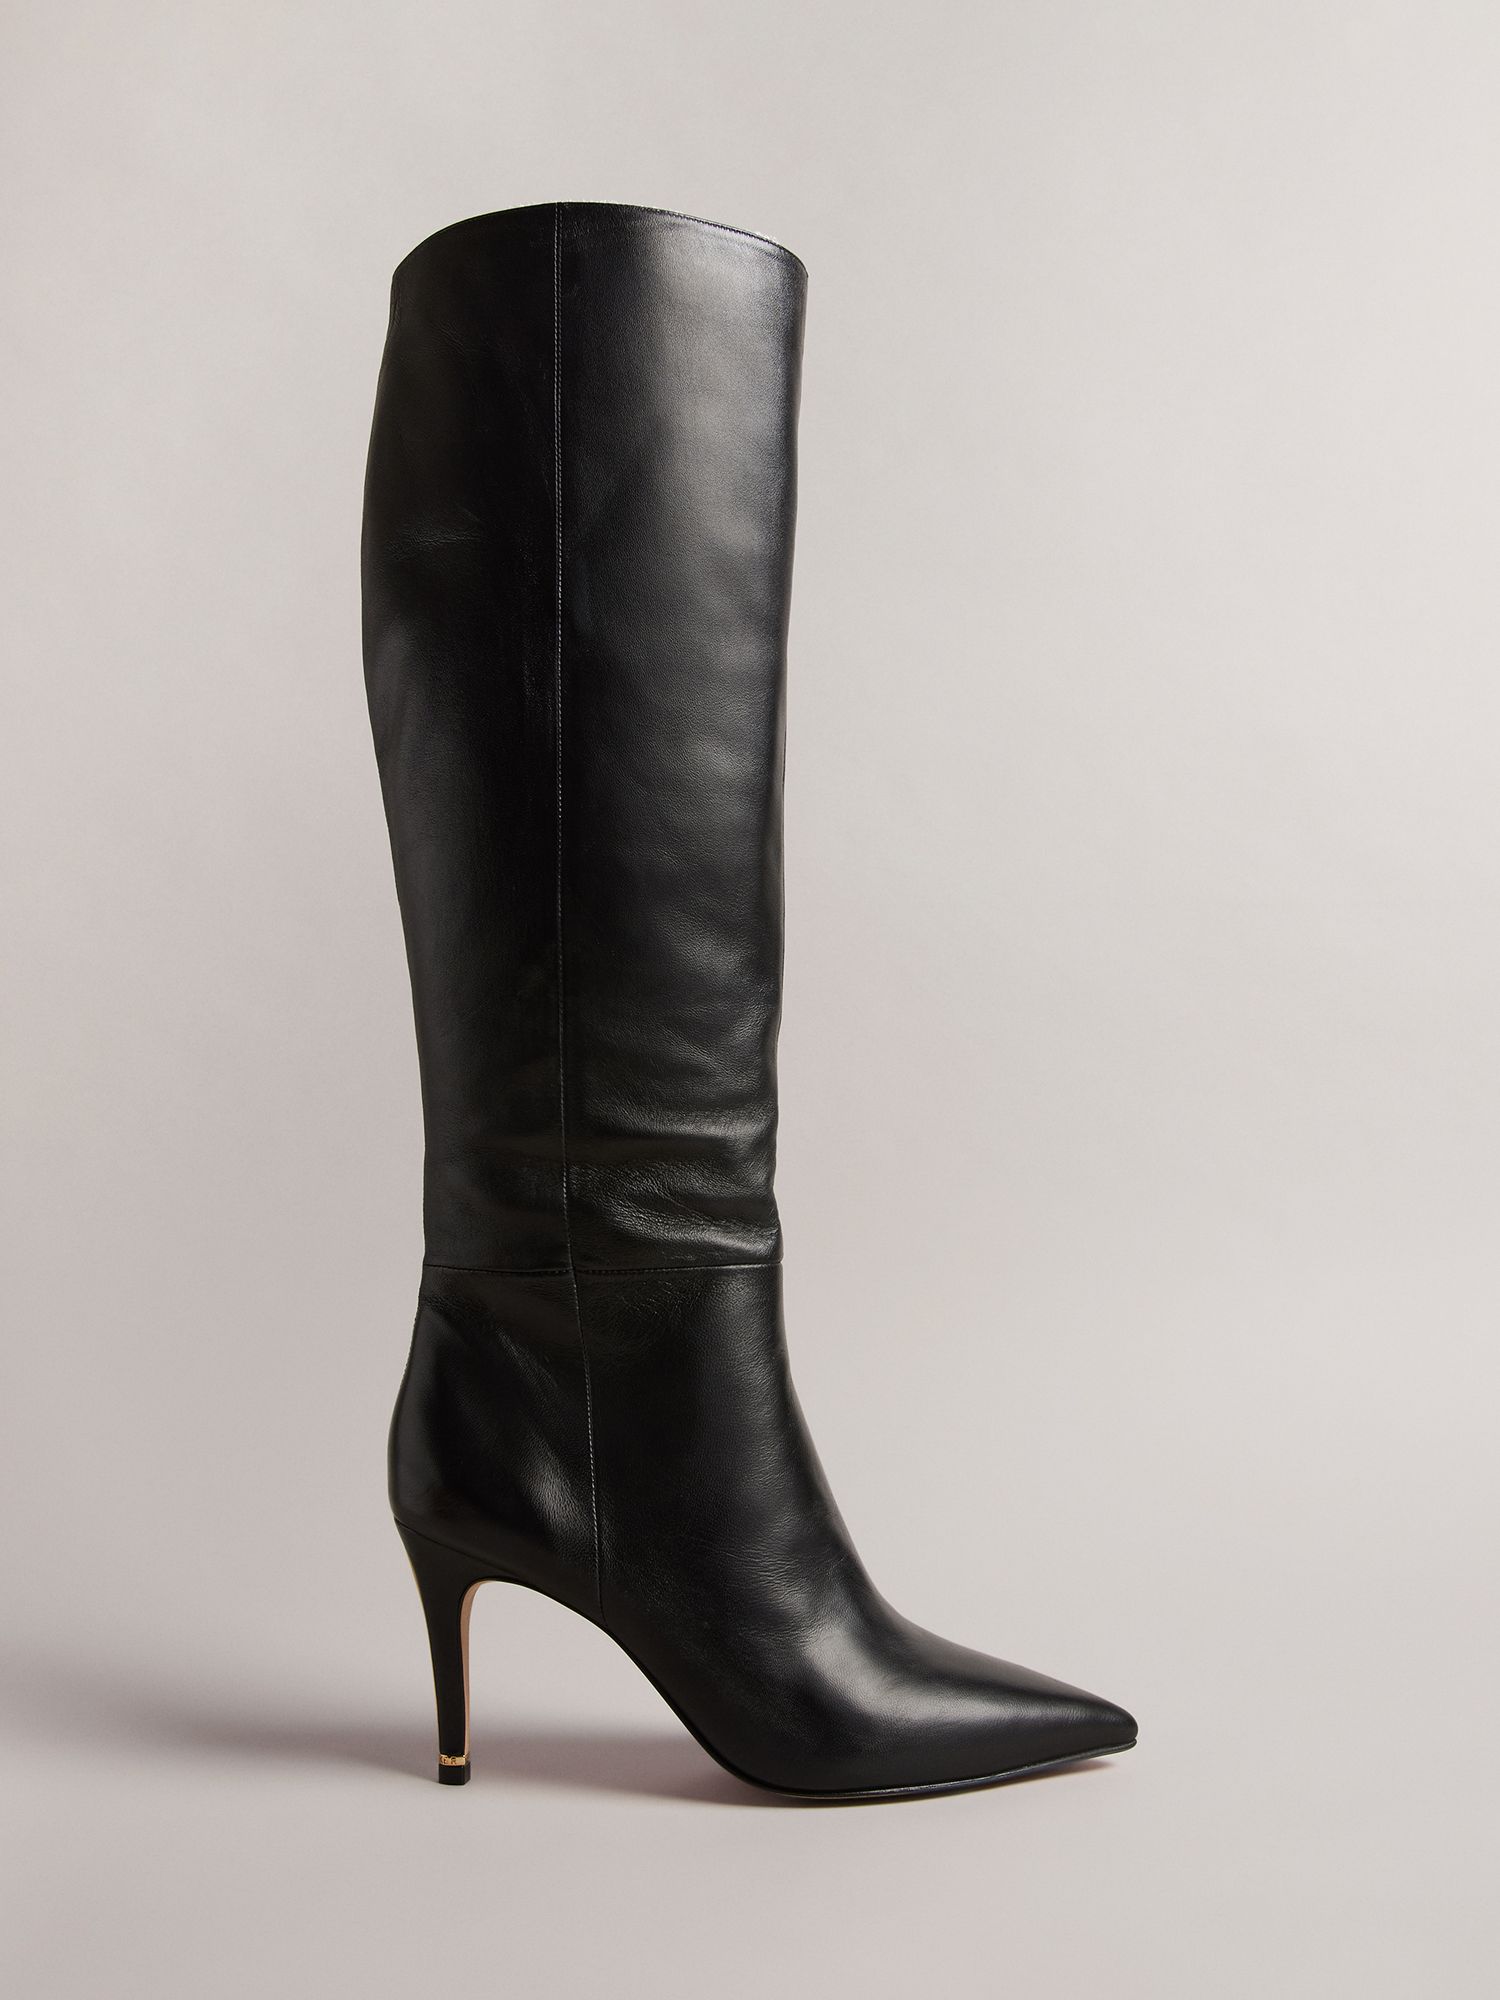 Ted Baker Yolla Leather Stiletto Knee High Boots, Black